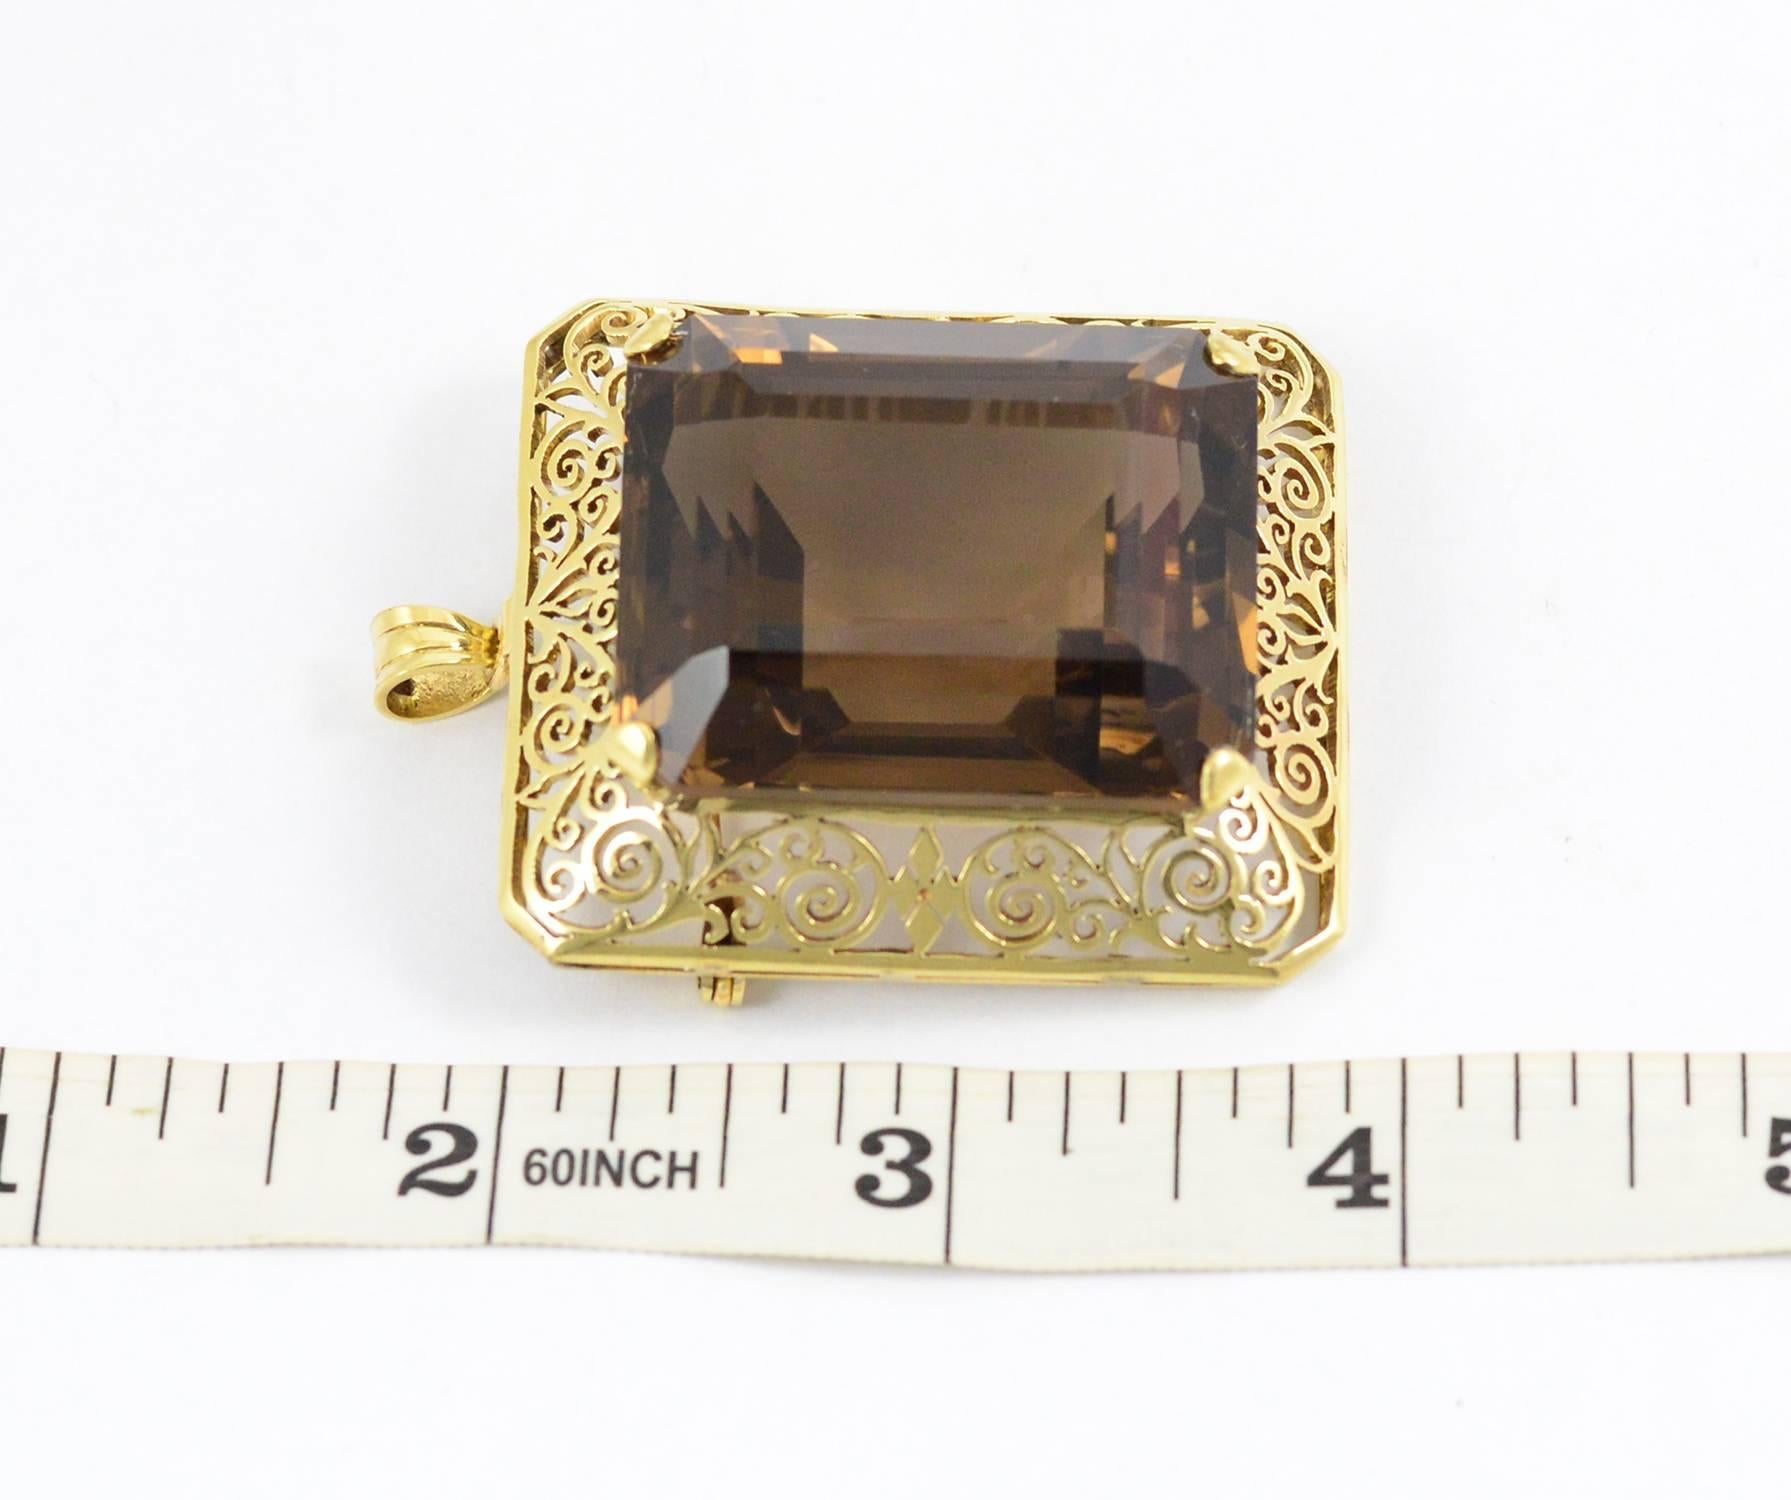 Magnificent 164 carat Smokey Quartz Gold Pendant/Brooch In Excellent Condition For Sale In Toronto, Ontario